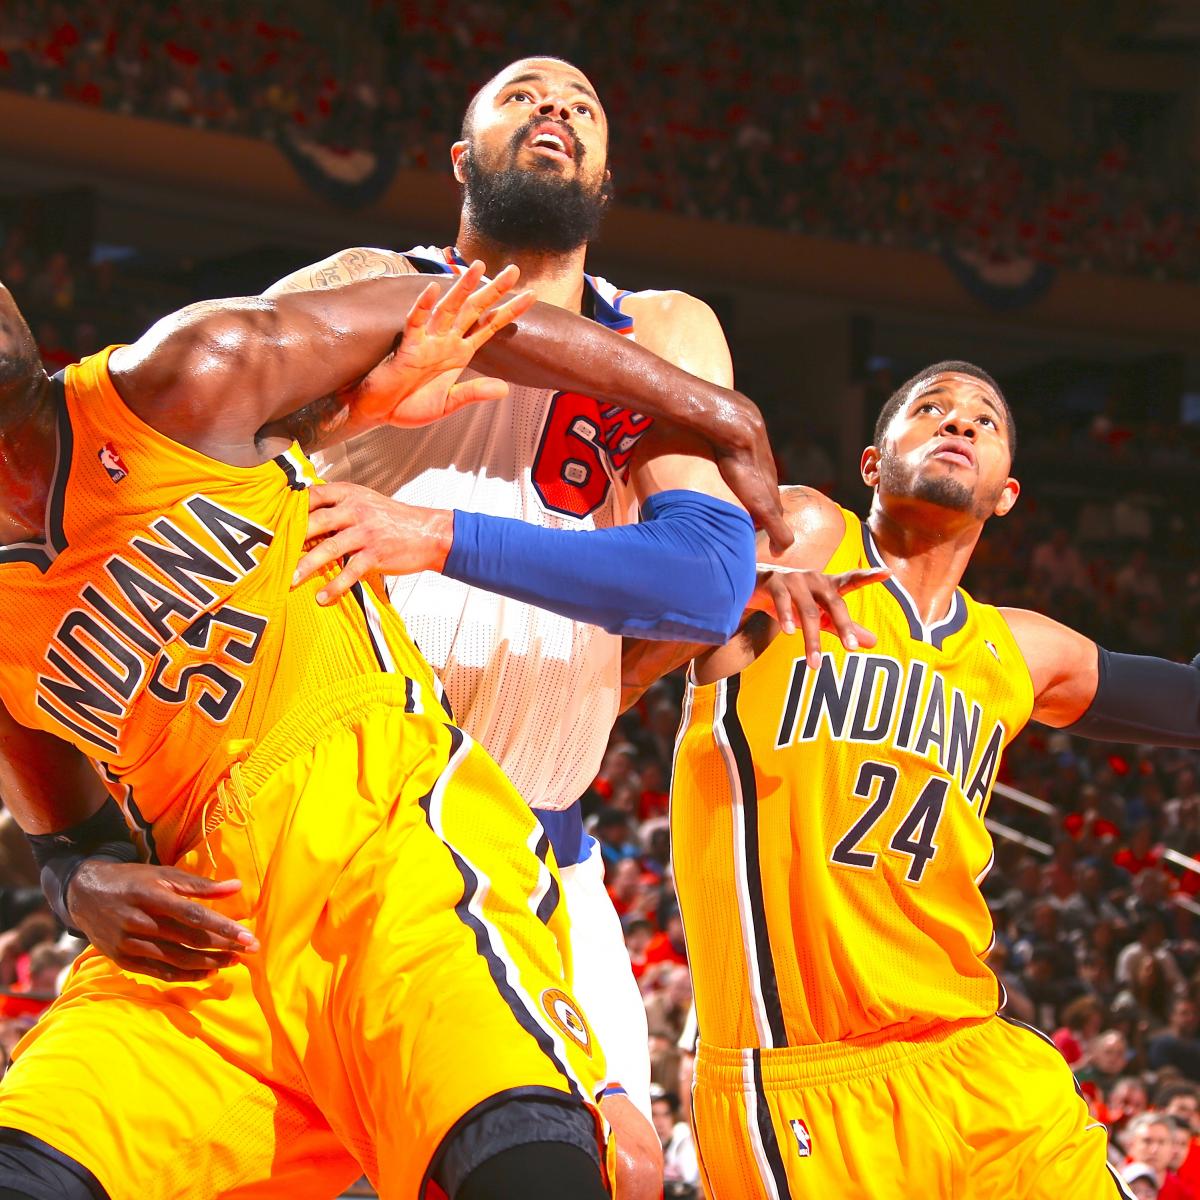 Indiana Pacers vs. New York Knicks Game 1 Score, Highlights and